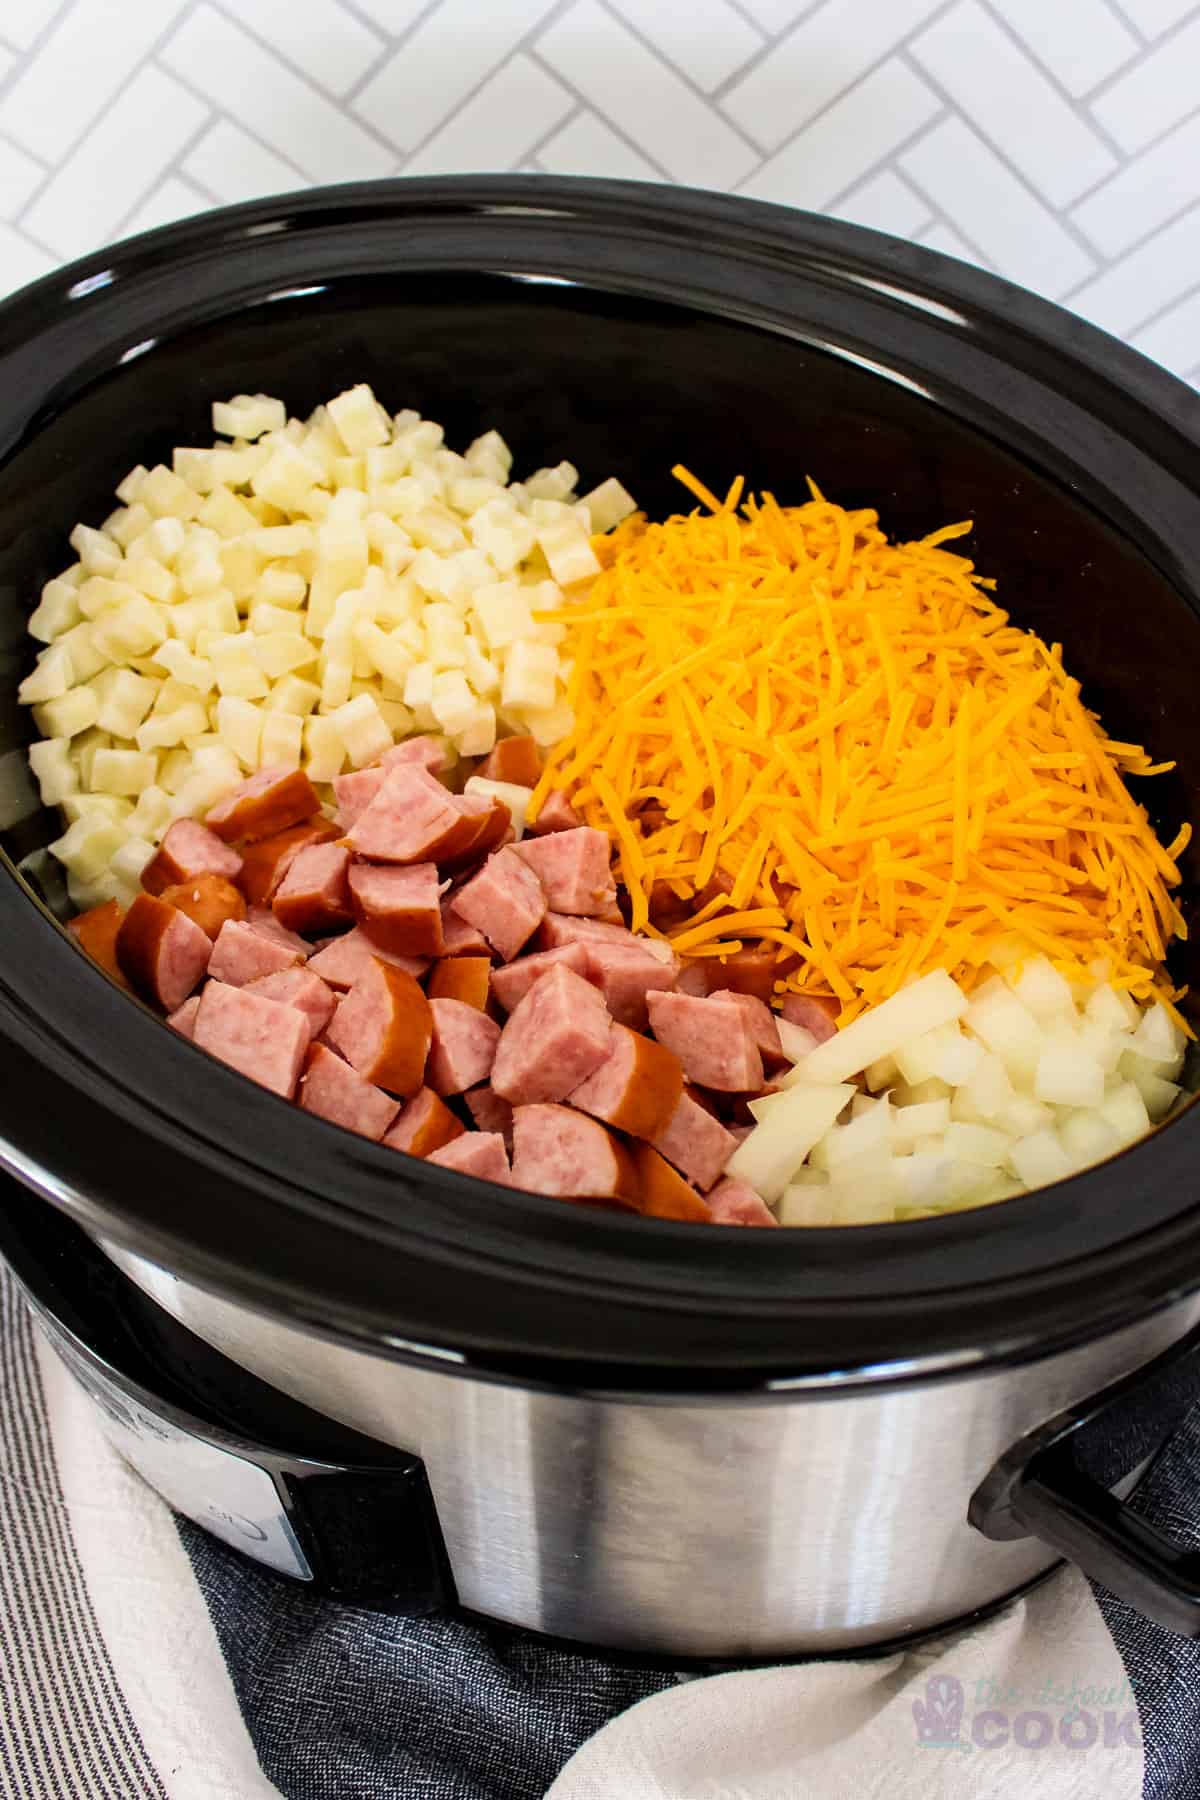 An oval crock pot with potatoes, kielbasa, onions, and cheddar cheese in it before cooking.